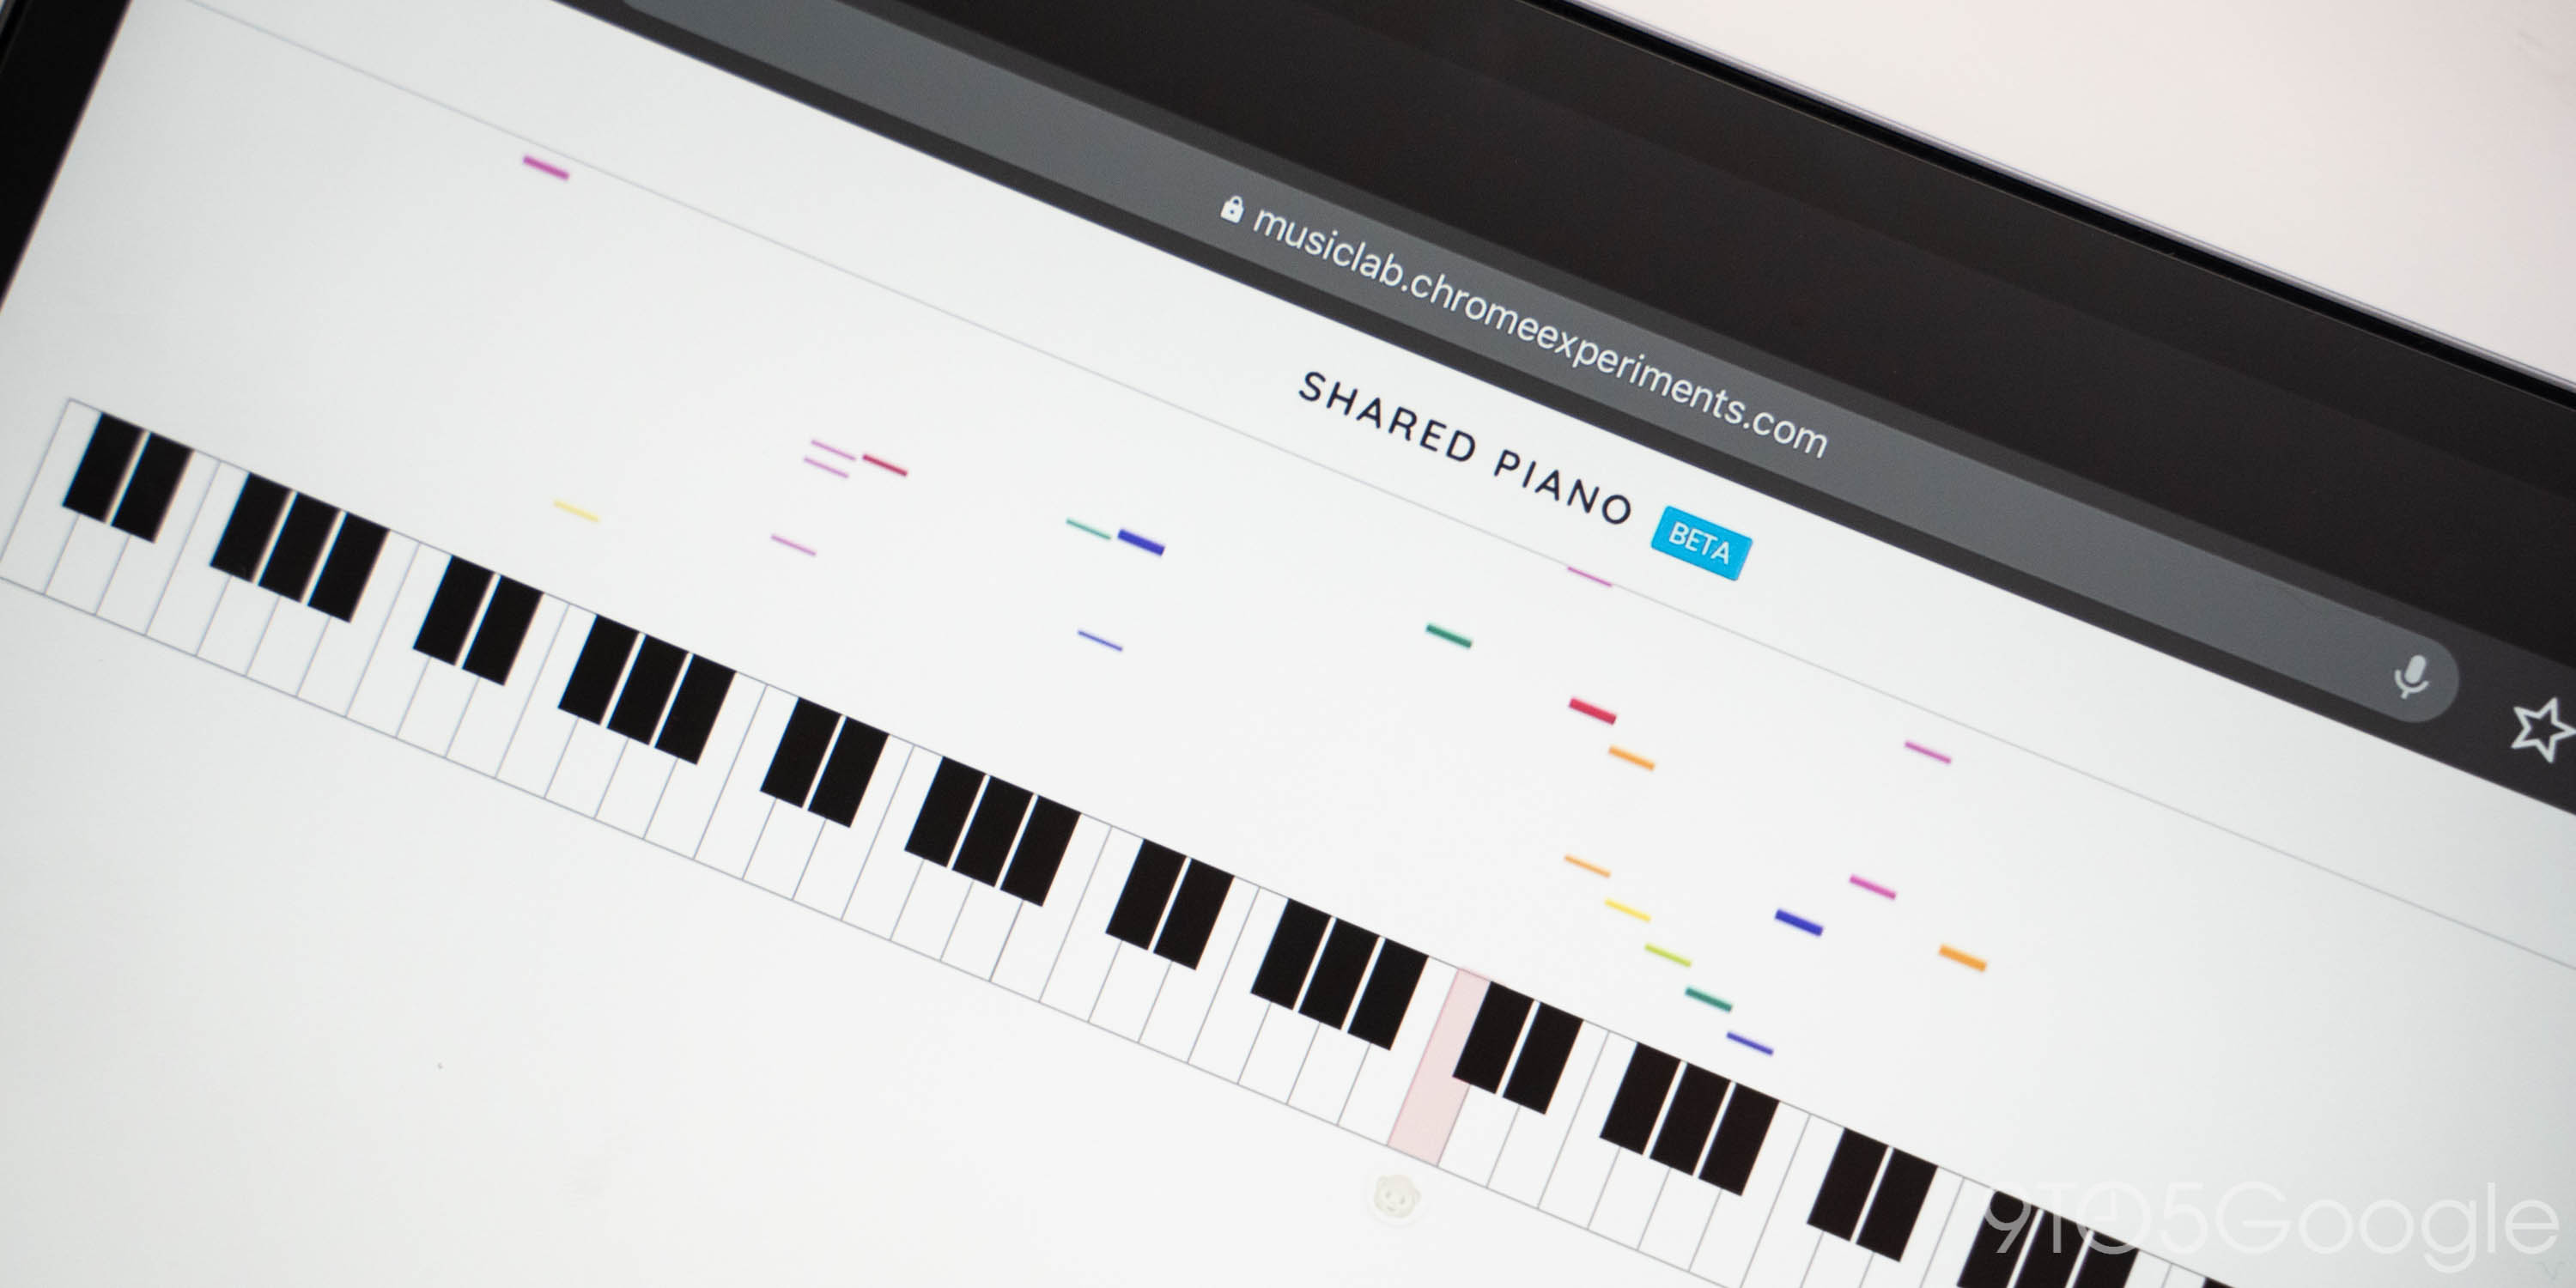 Google S Shared Piano Lets You Create Music W Friends 9to5google